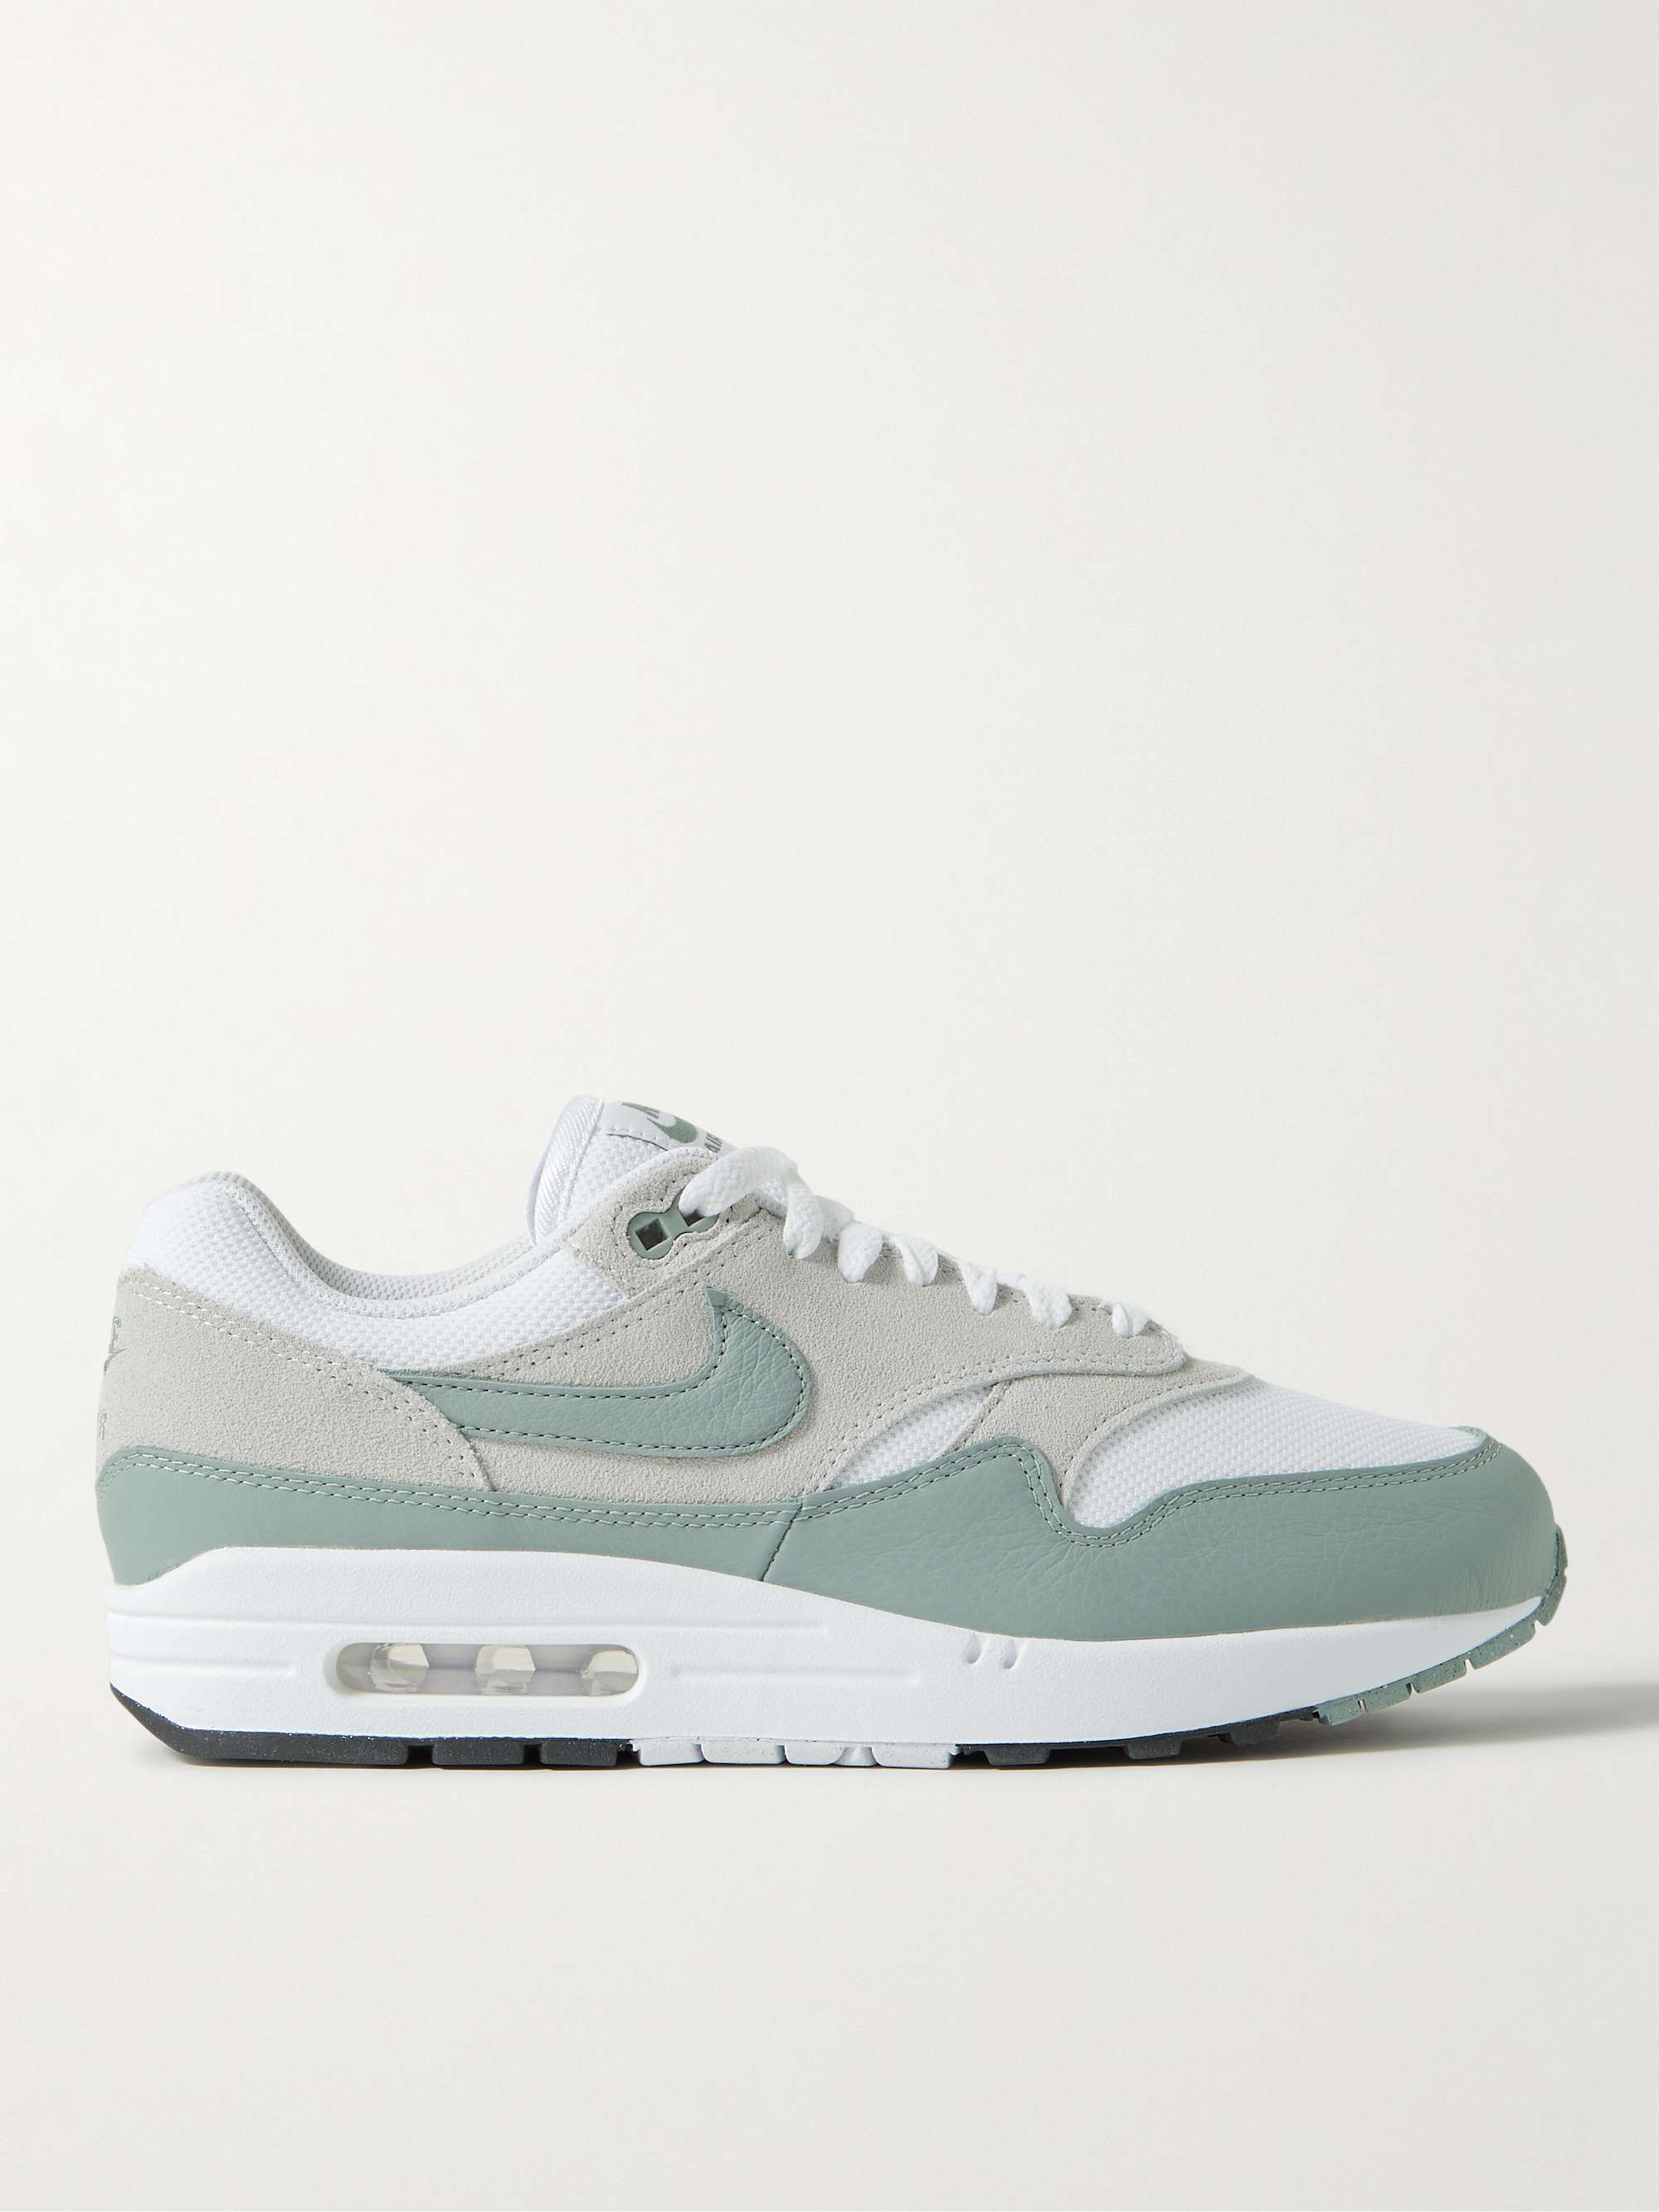 NIKE Air Max 1 SC Suede, Mesh and Leather Sneakers | MR PORTER